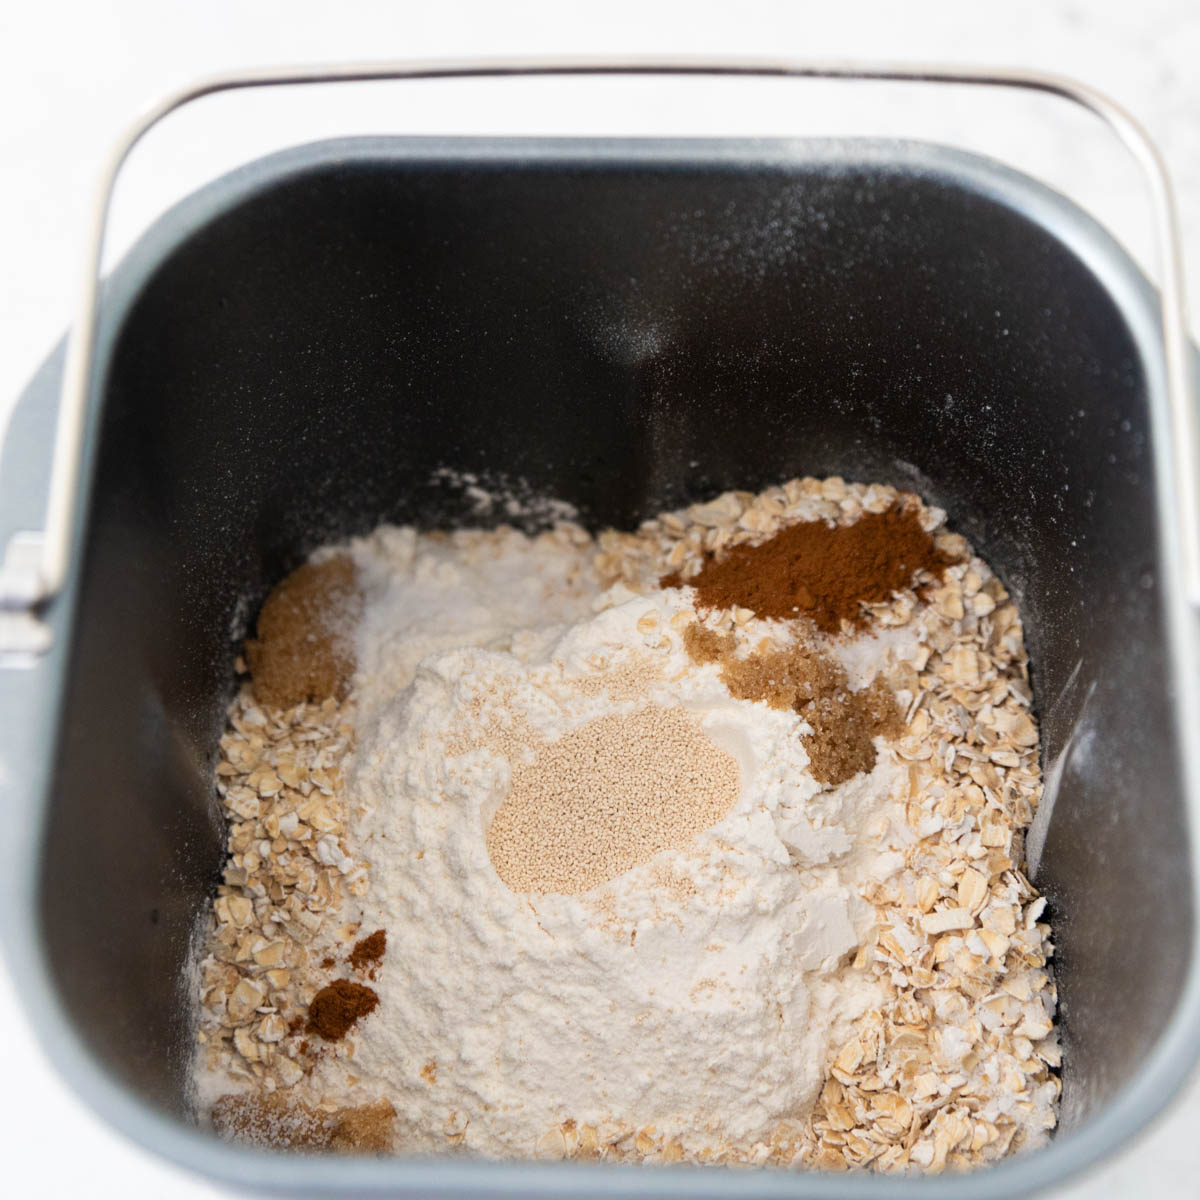 The dry ingredients have been added to the bread pan.